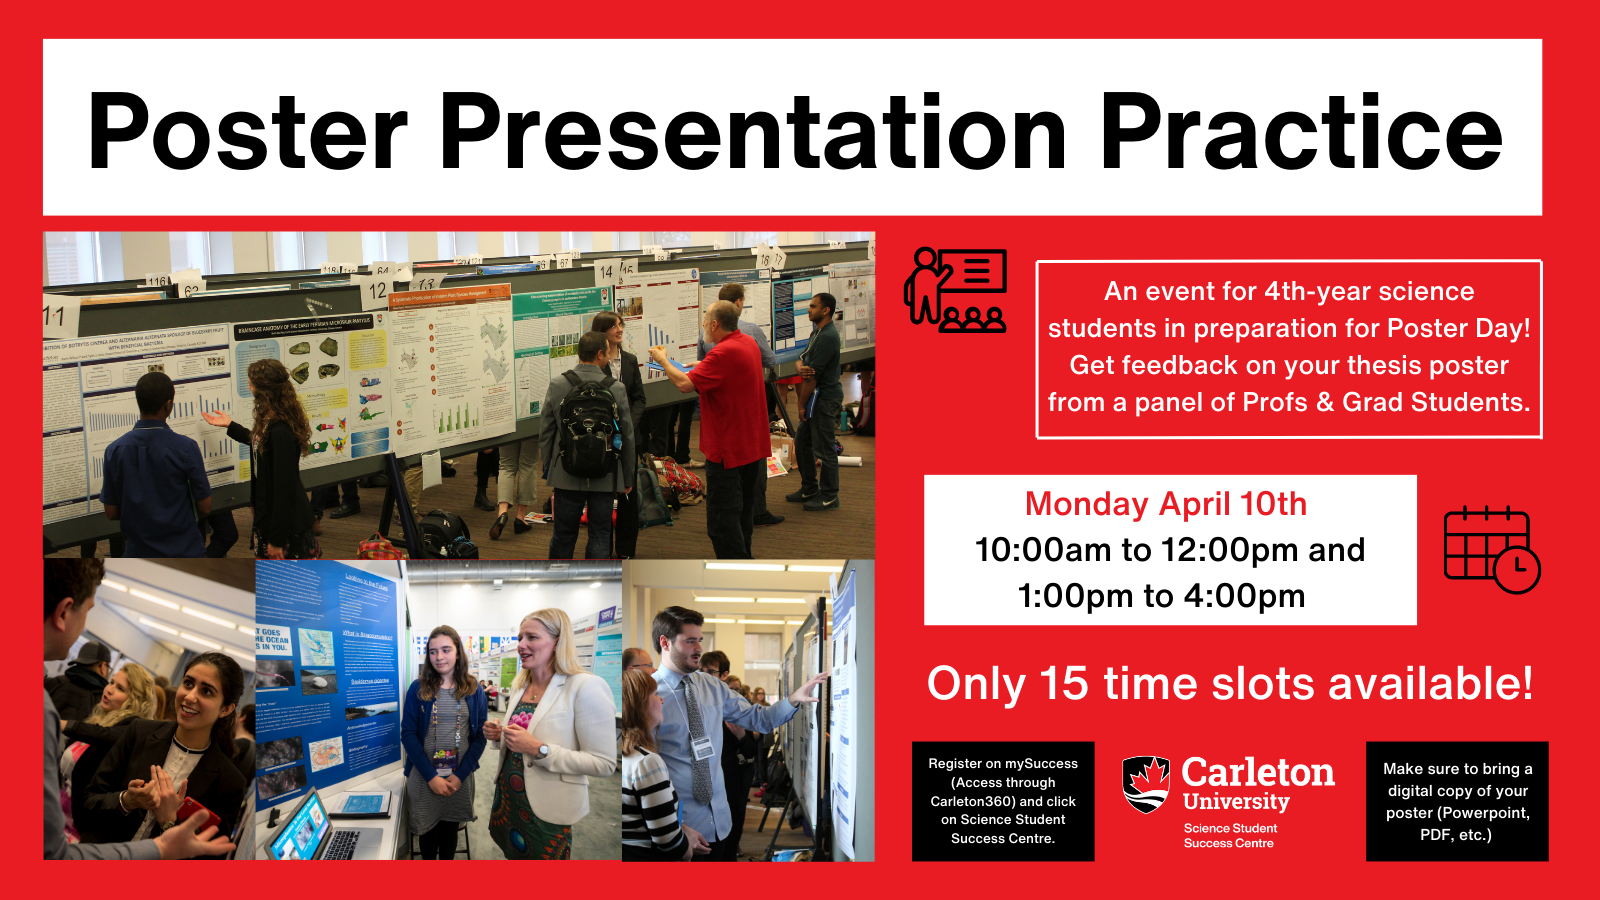 Poster with text. Red background. Title shown in black text on white rectangle: Poster Presentation Practice. Below on the left half, shows a four photo collage of people chatting and presenting their posters. On the right, text reads: An event for 4th-year science students in preparation for Poster Day! Get feedback on your thesis poster from a panel of Profs & Grad Students. Monday April 10th, 10:00am to 12:00pm and 1:00pm to 4:00pm. Only 15 time slots available! Register on mySuccess (Access through Carleton360) and click on Science Student Success Centre. Carleton University, Science Student Success Centre logo. Make sure to bring a digital copy of your poster (Powerpoint, PDF, etc.)